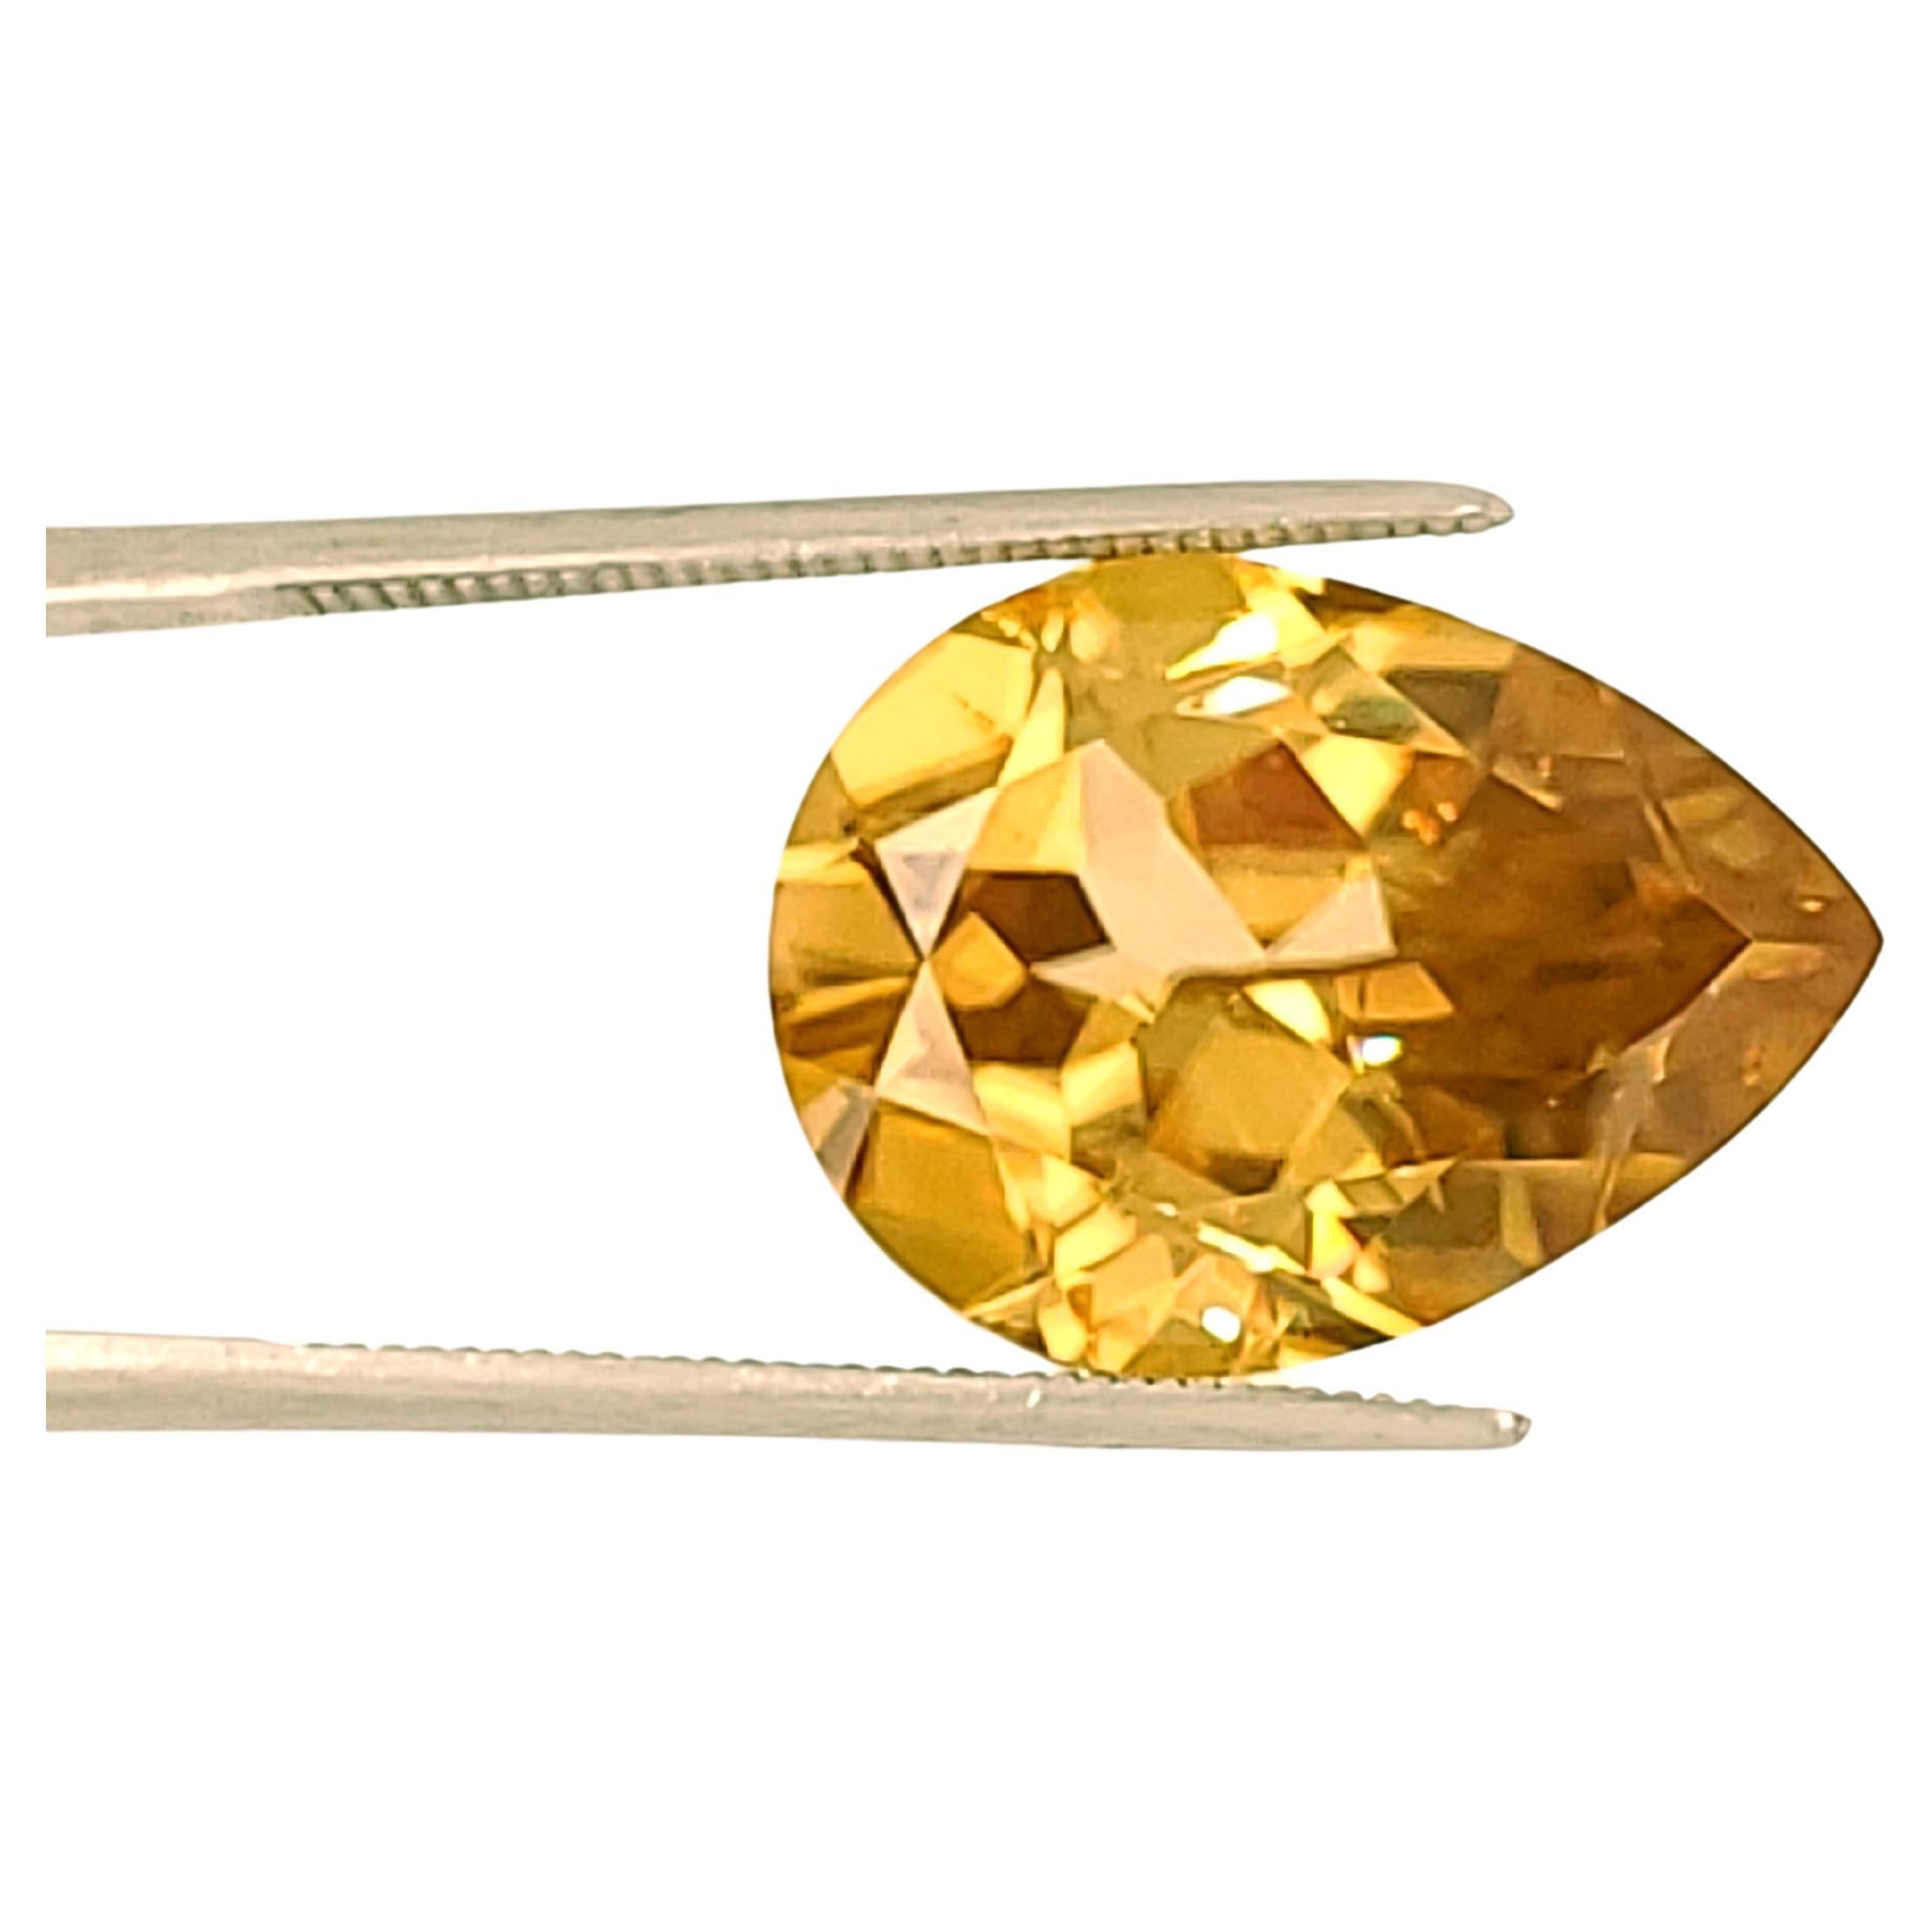 10.97ct Bright Yellow/Gold Pear Shaped Natural Zircon - U.S. Faceted For Sale